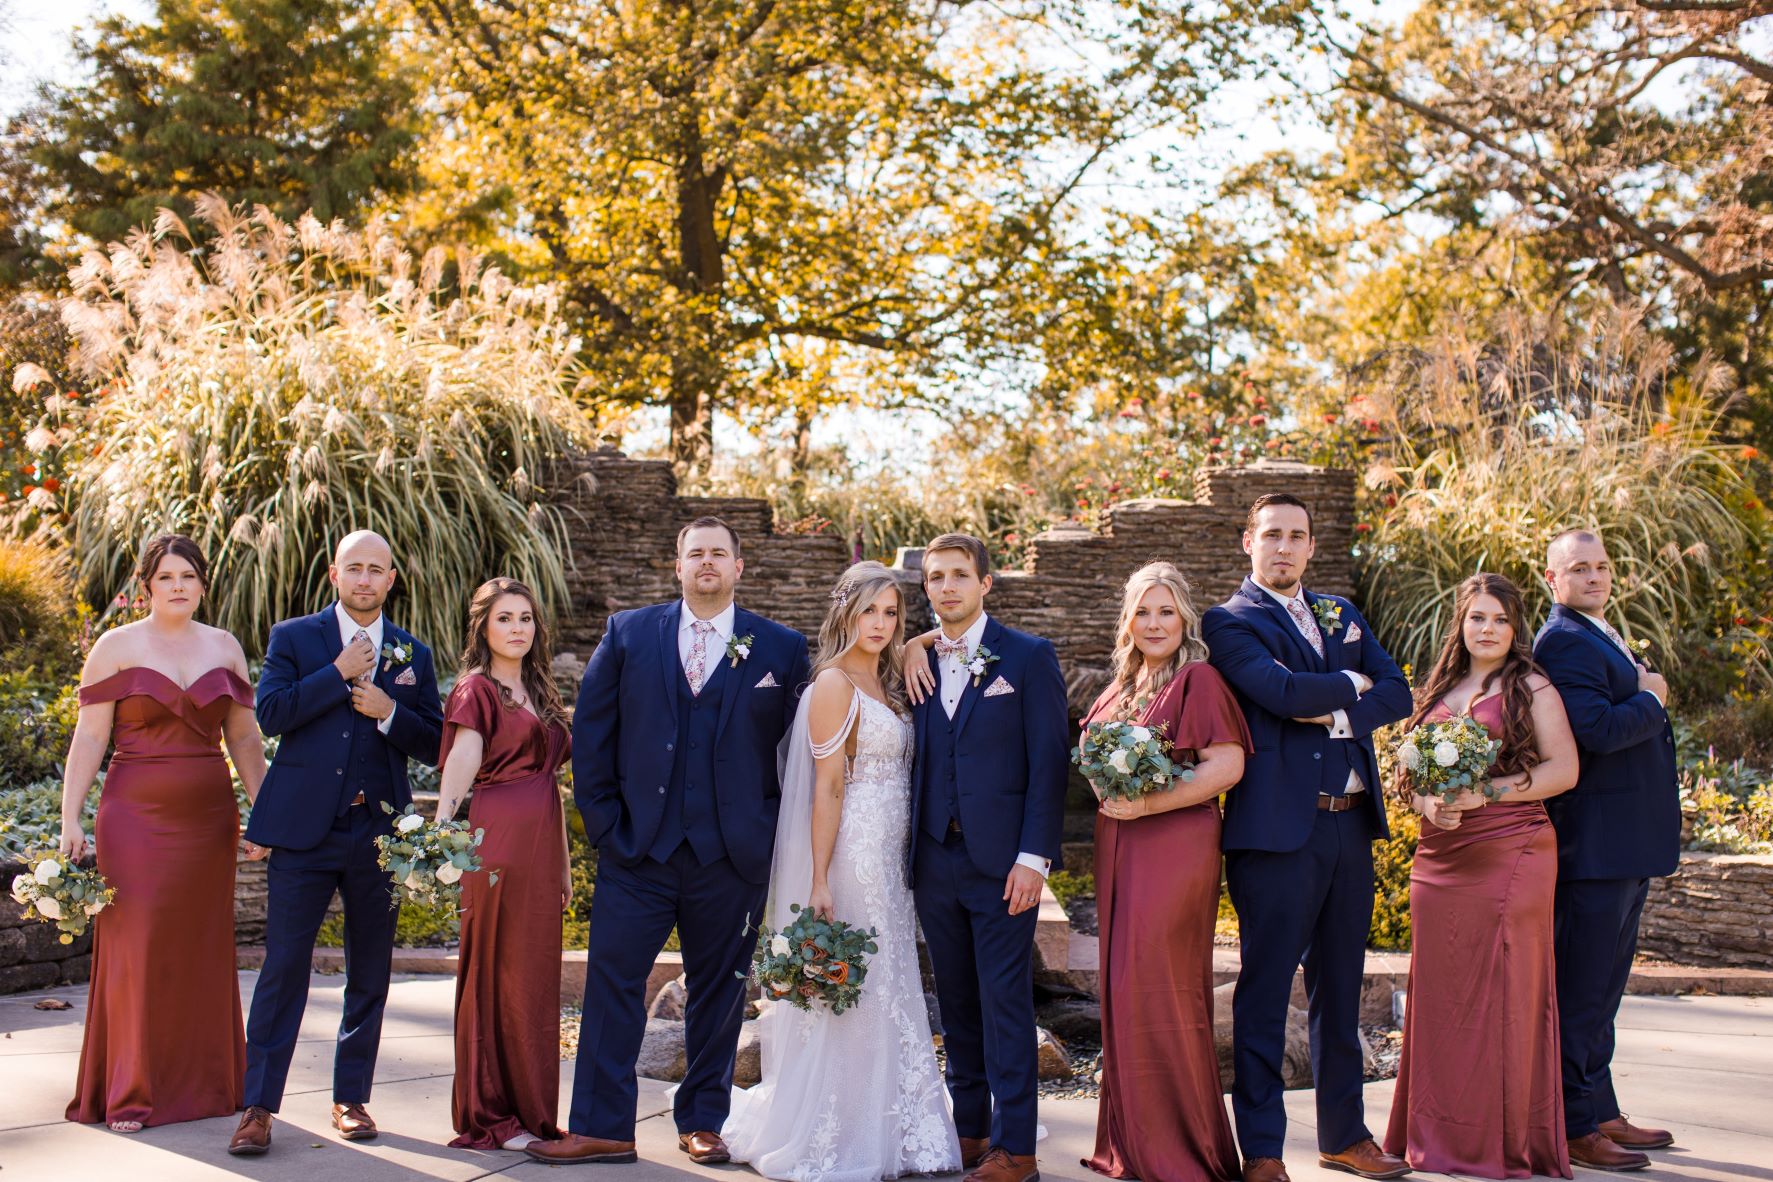 bridal party with guys in navy suits, bride in white wedding dress, bridesmaids in cinnamon colored dresses